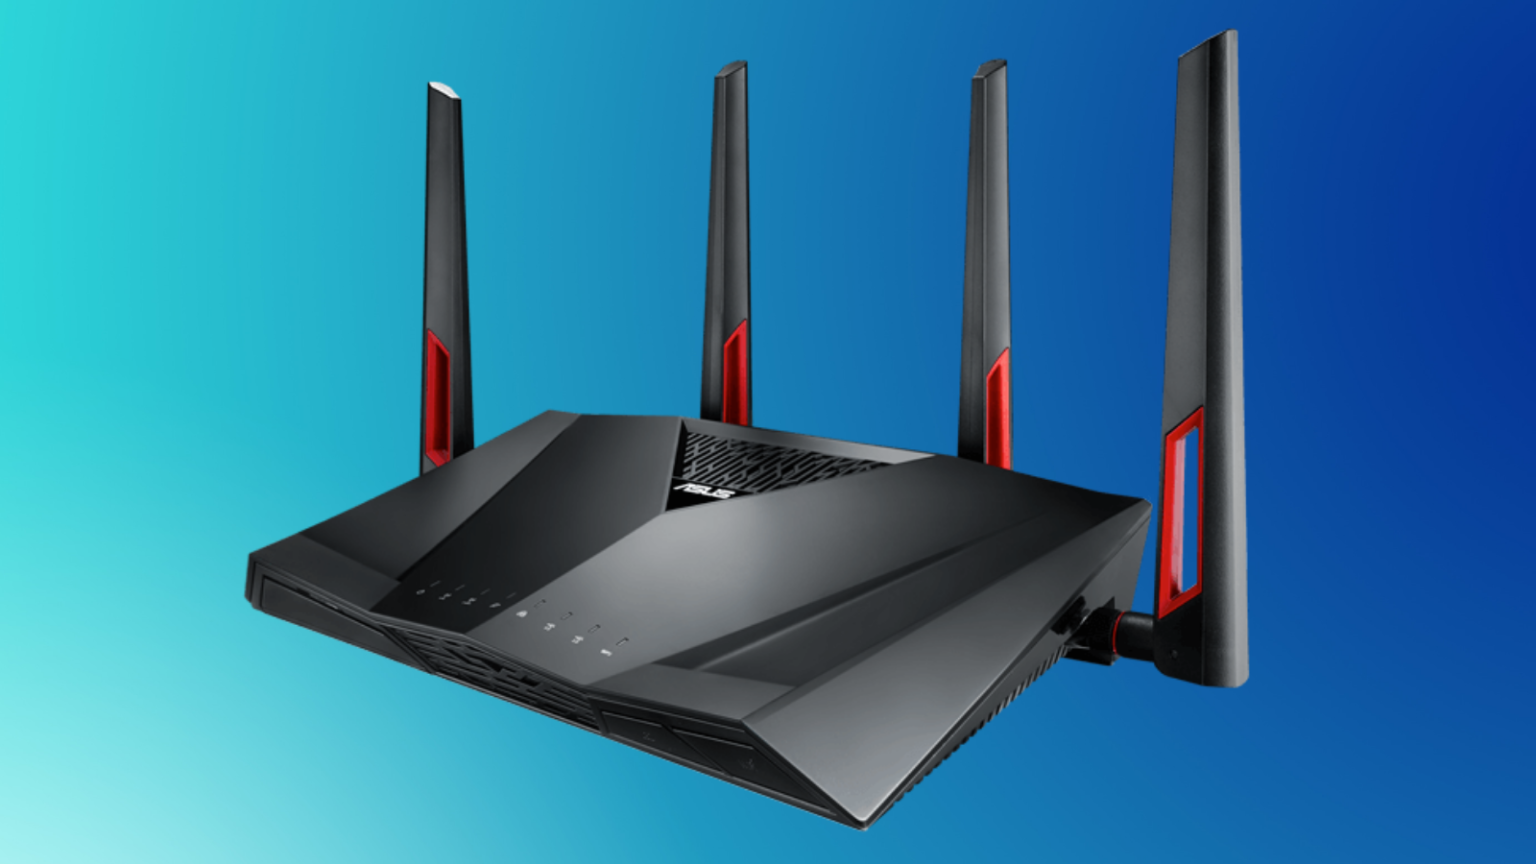 Best ASUS Routers to Buy in 2021 For Multimedia and Productivity TechNadu